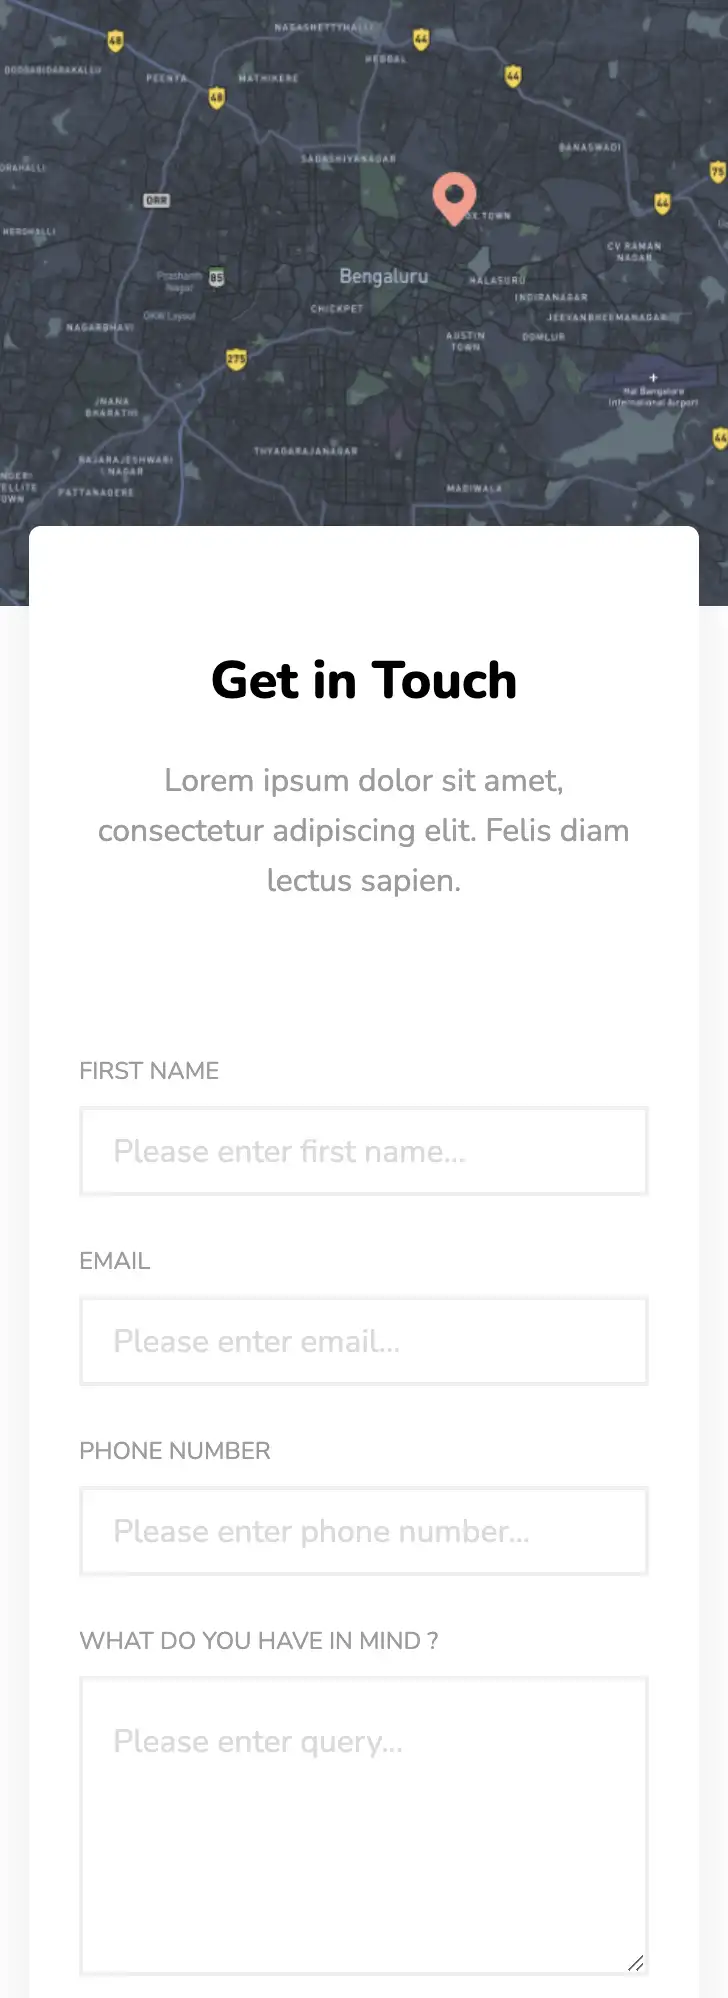 Contact designs for websites: Responsive Contact Form Mobile